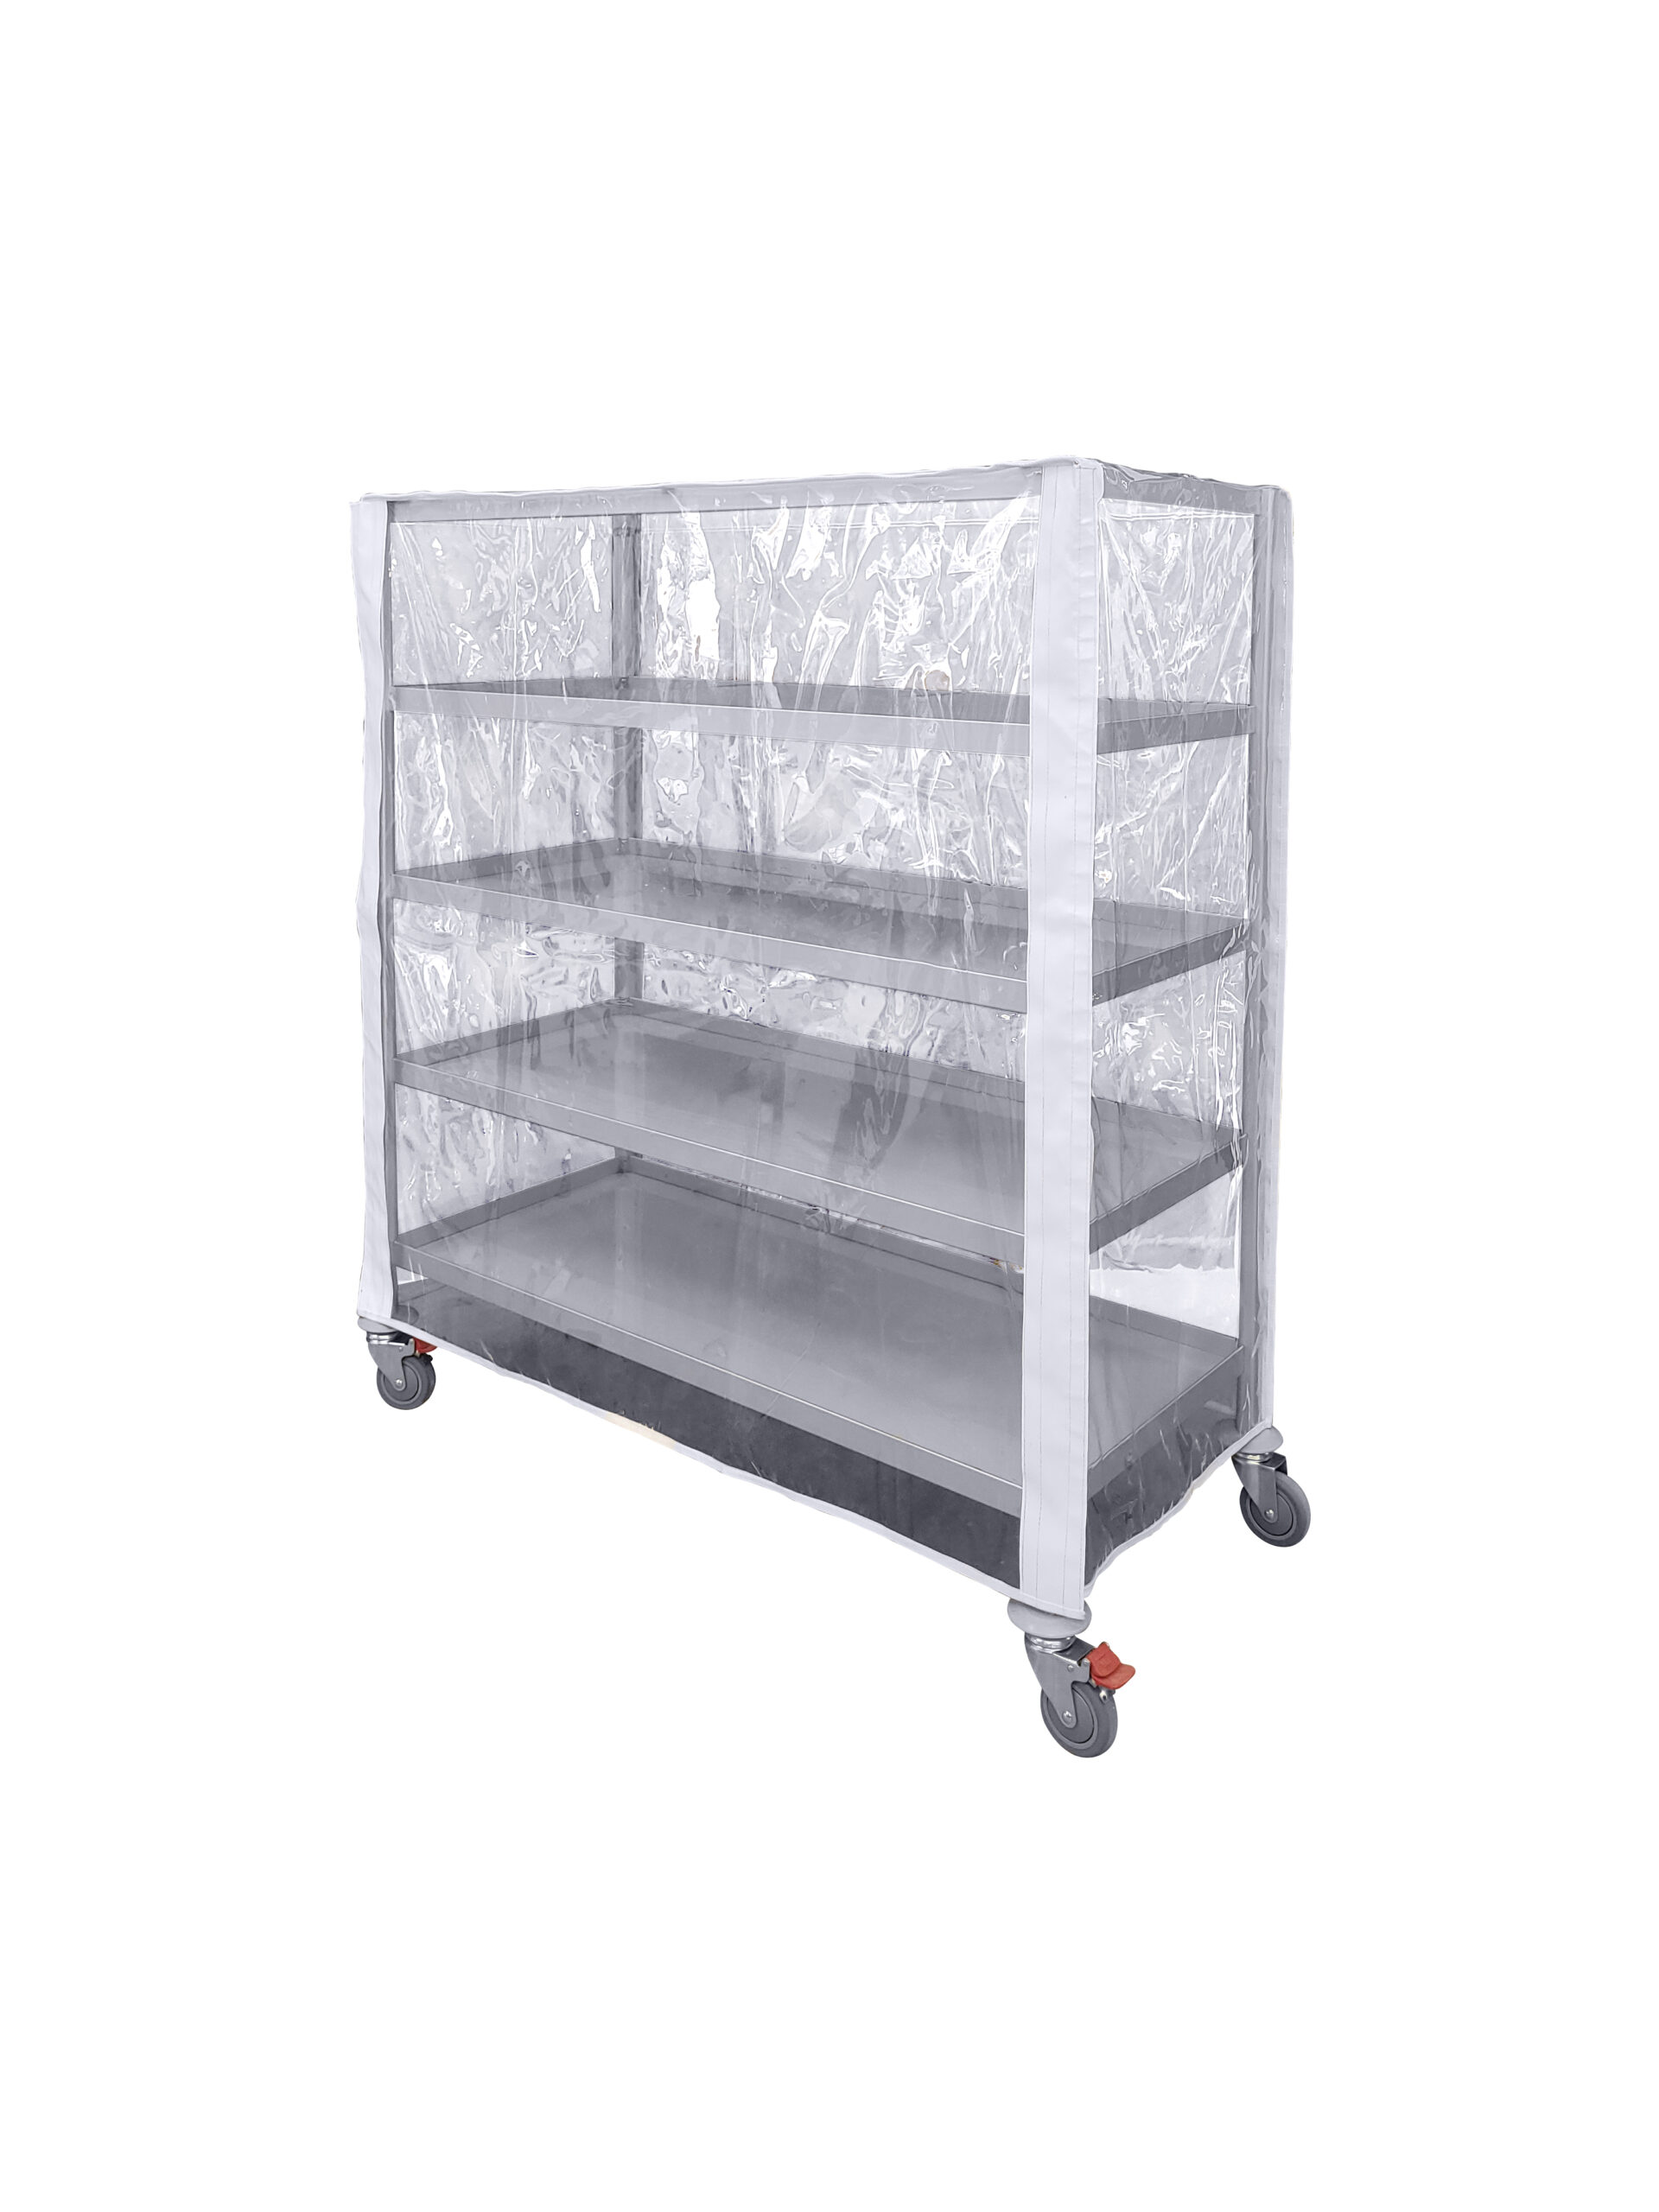 Clean Linen Trolley with clear cover